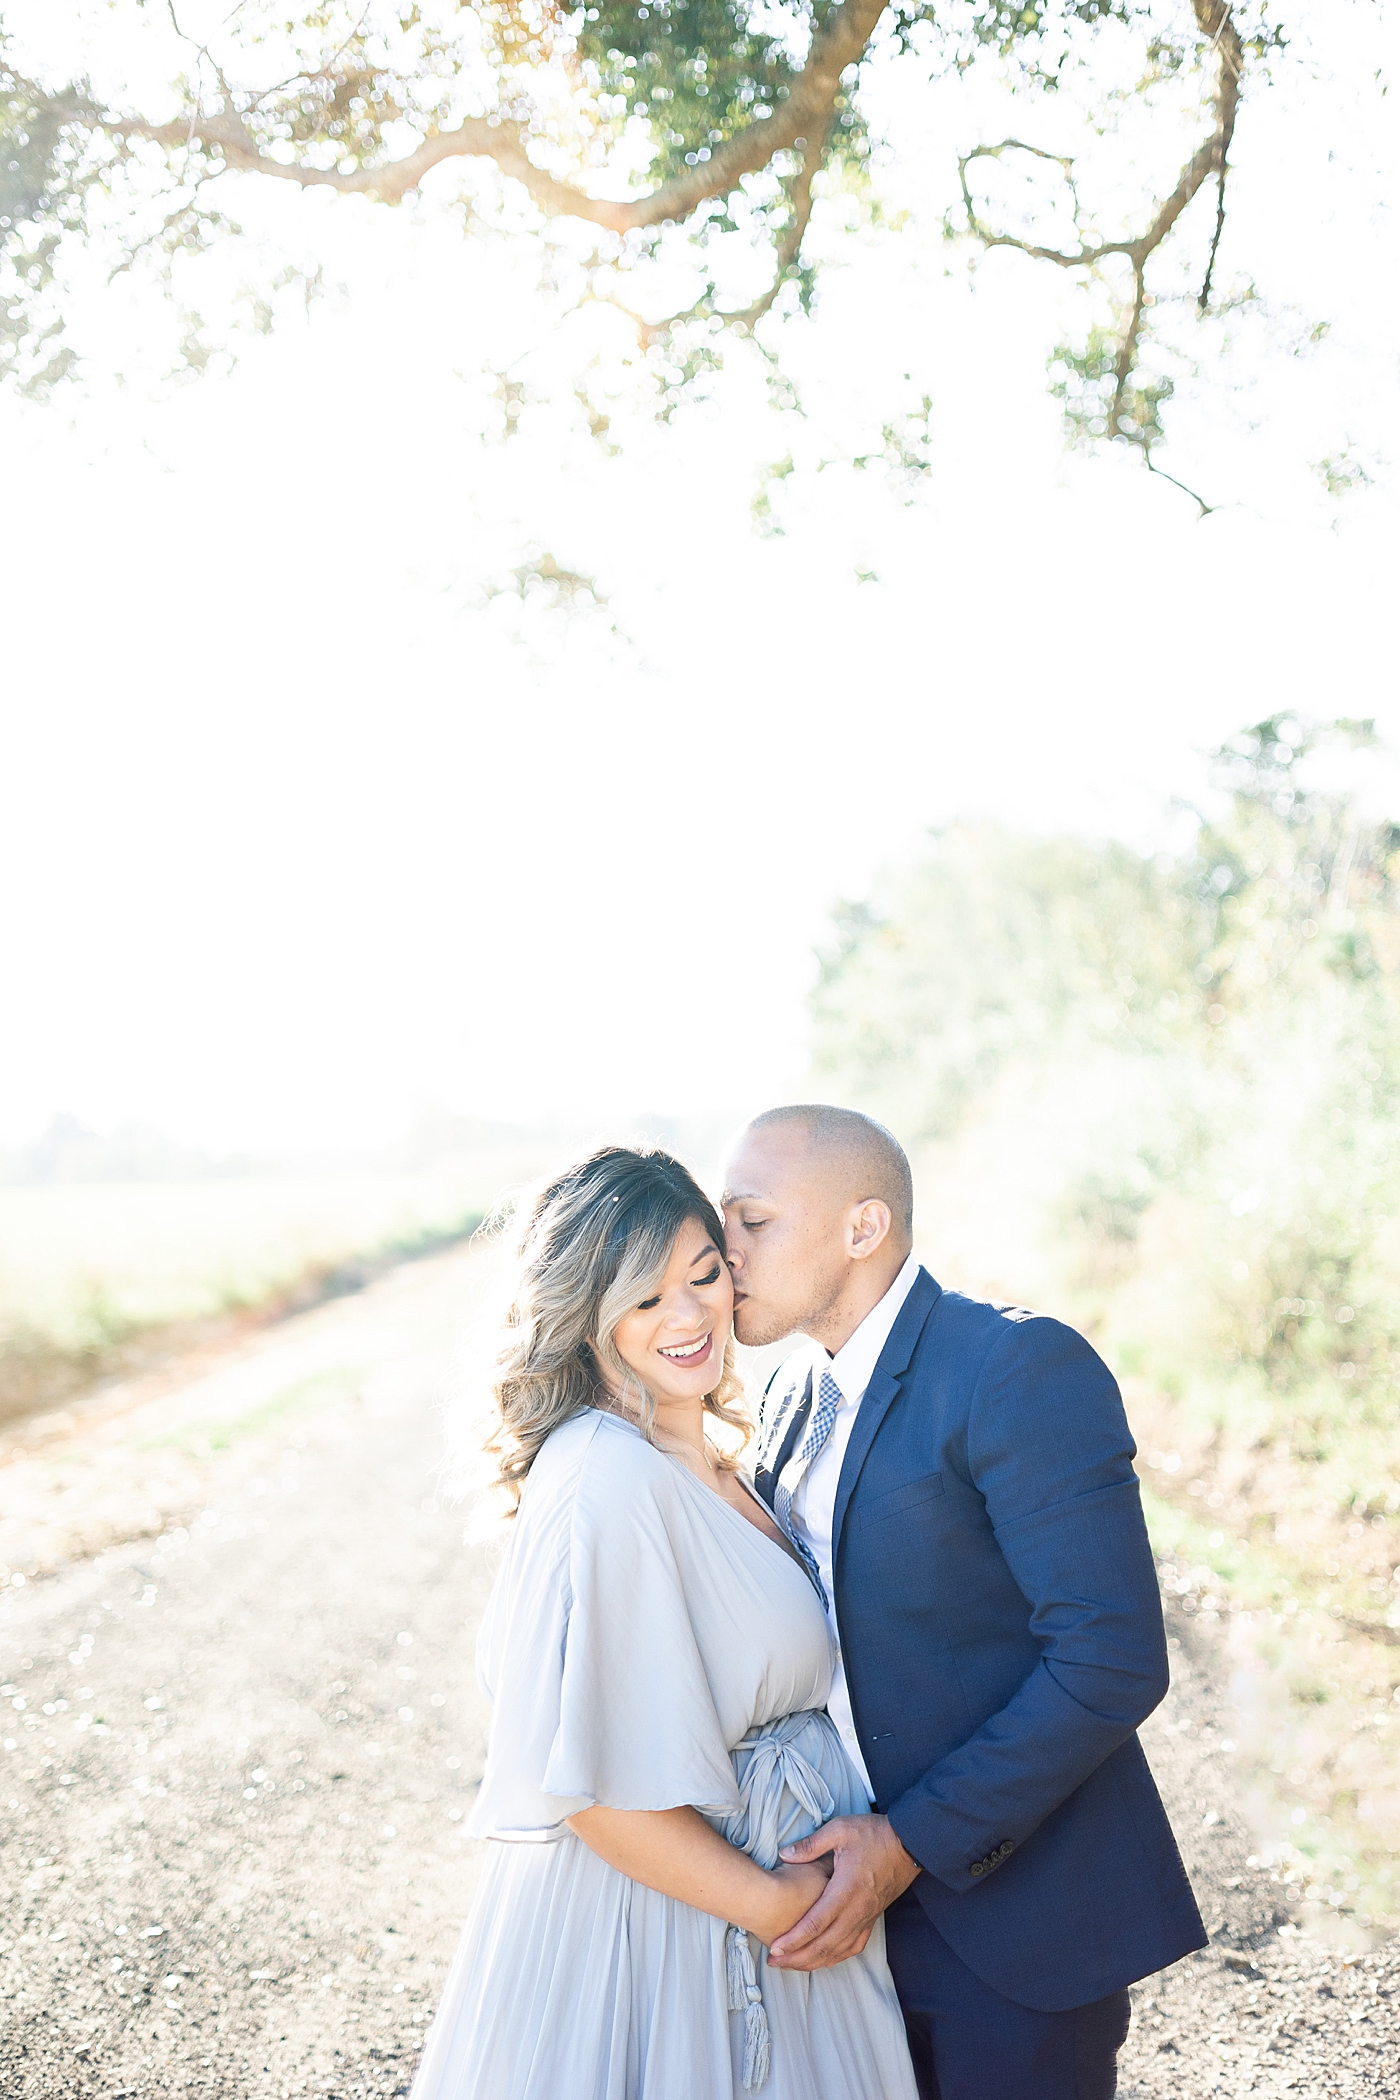 Dad to be kissing mom on the cheek | Photo by Little Sunshine Photography 